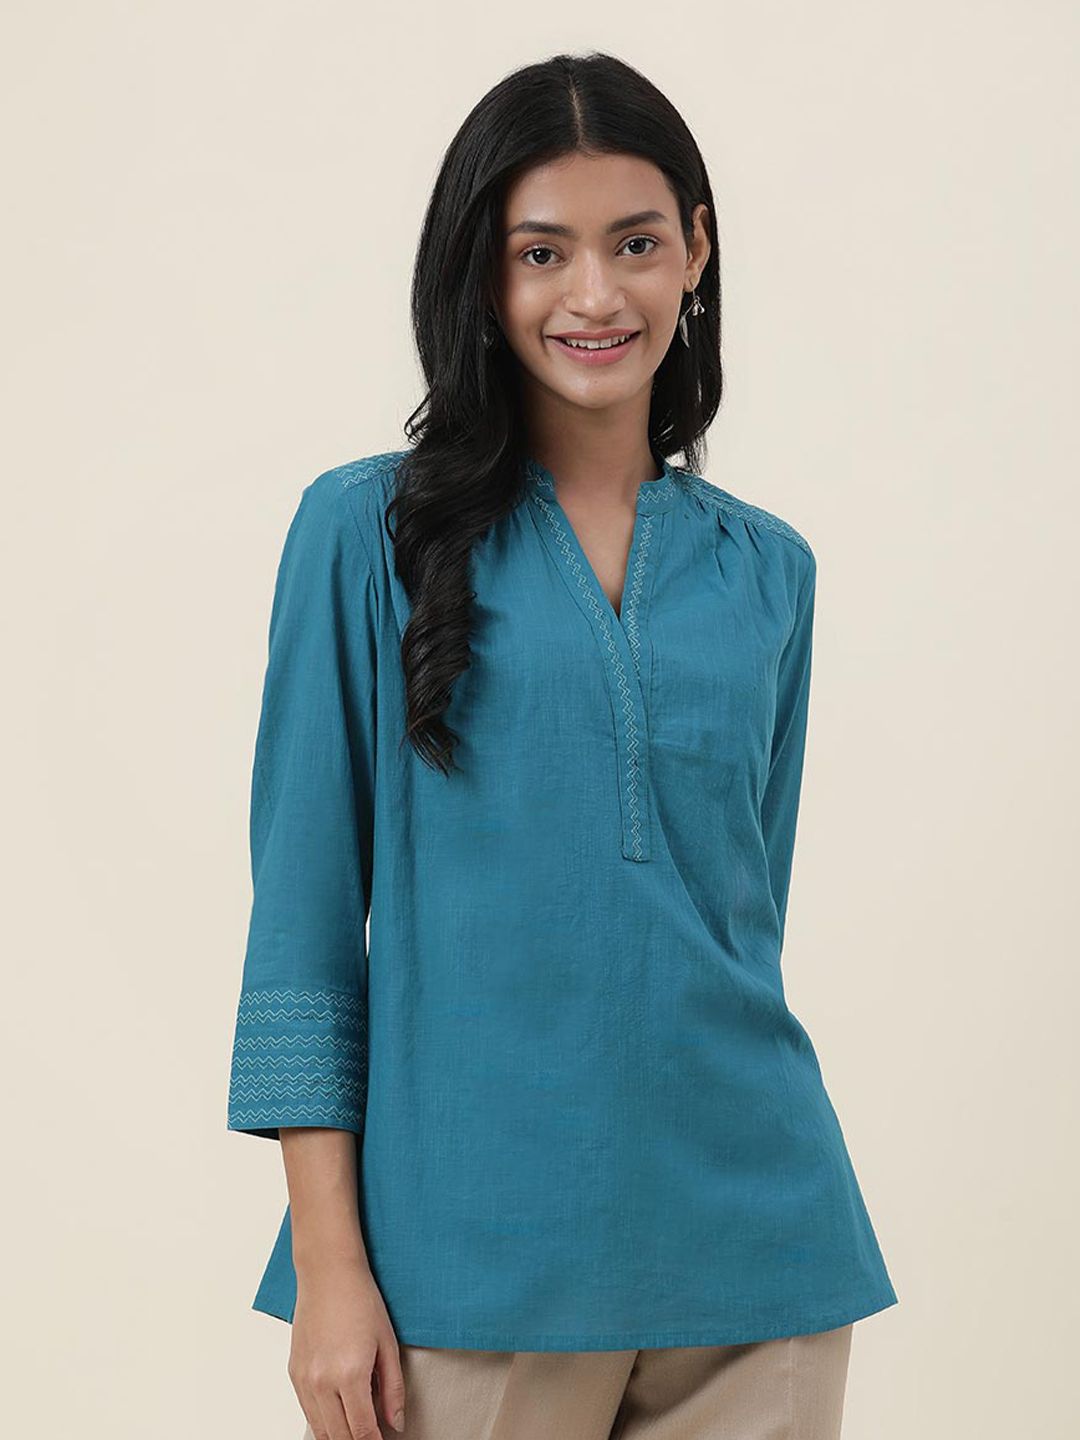 Fabindia Turquoise Blue Embroidered Pure Cotton Kurti Price in India